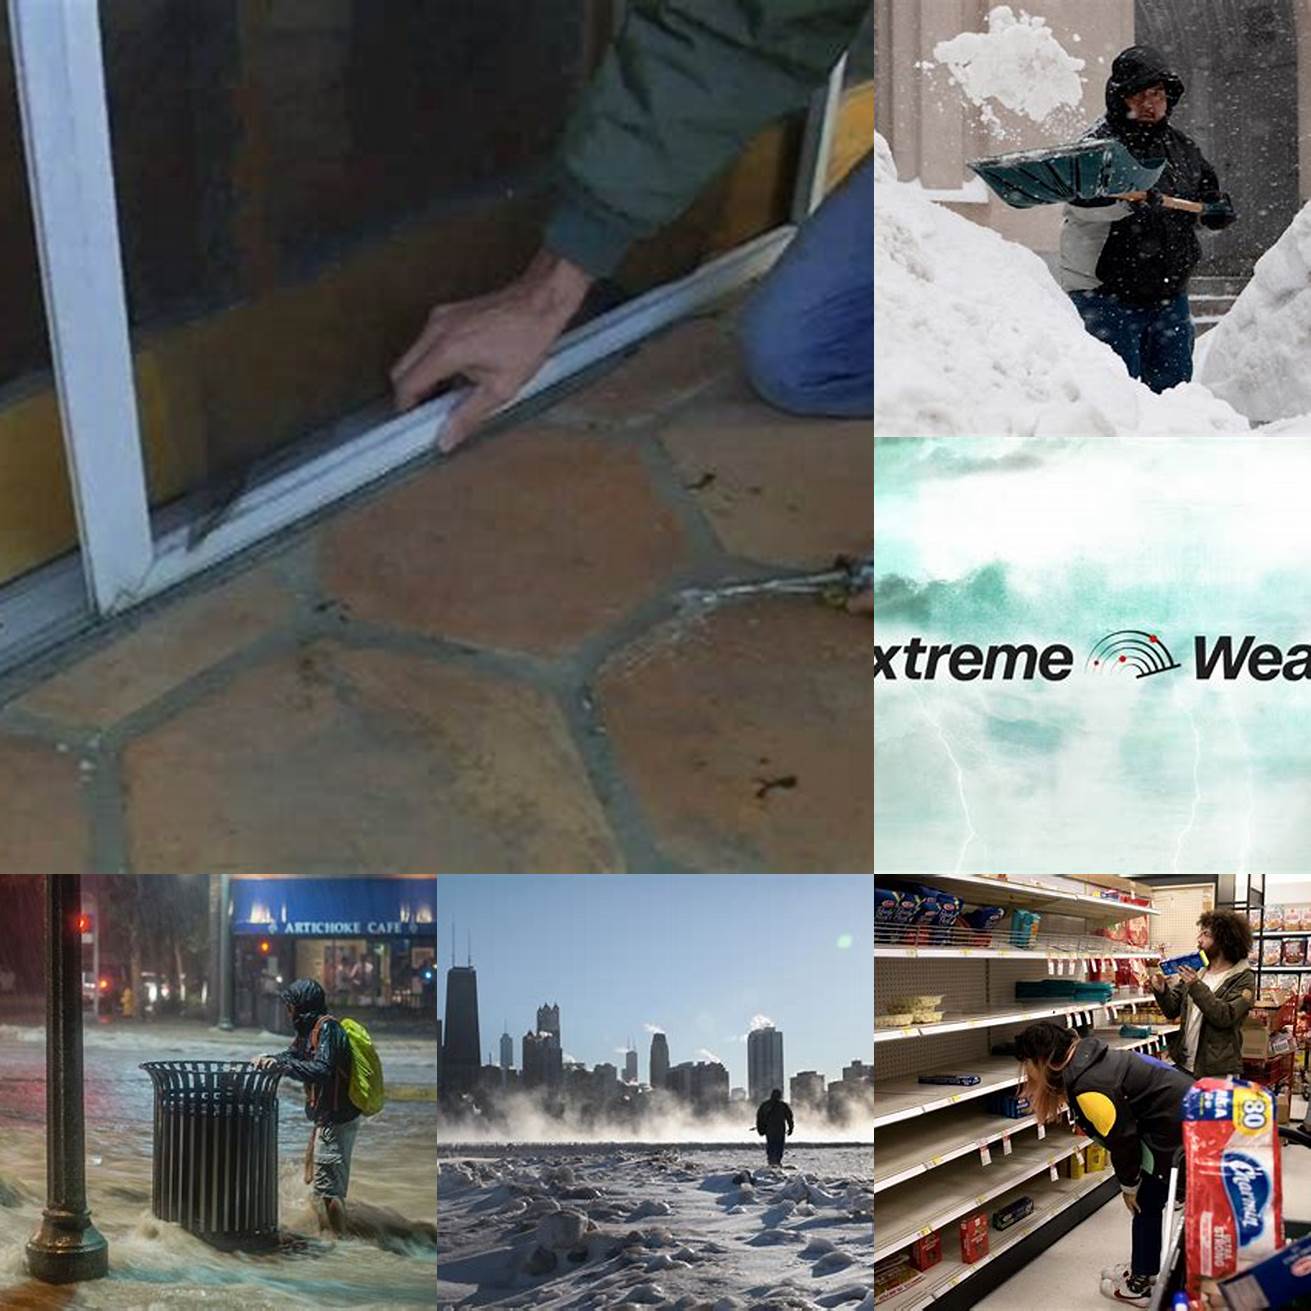 Store during off-seasons If you live in an area with extreme weather conditions consider removing the screen door during the off-seasons to prevent damage